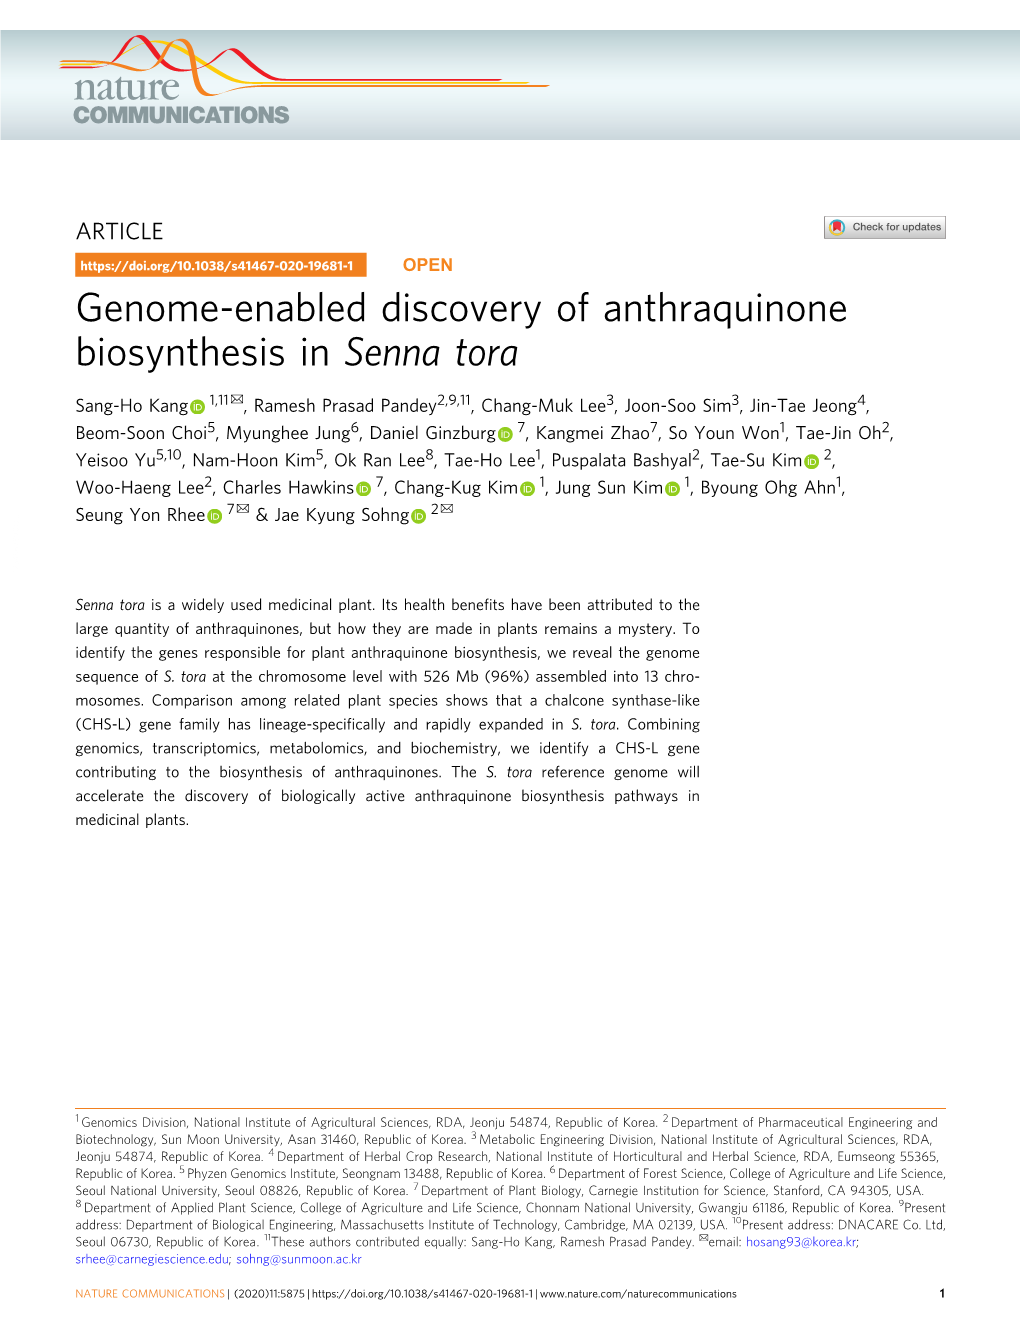 Genome-Enabled Discovery of Anthraquinone Biosynthesis in Senna Tora